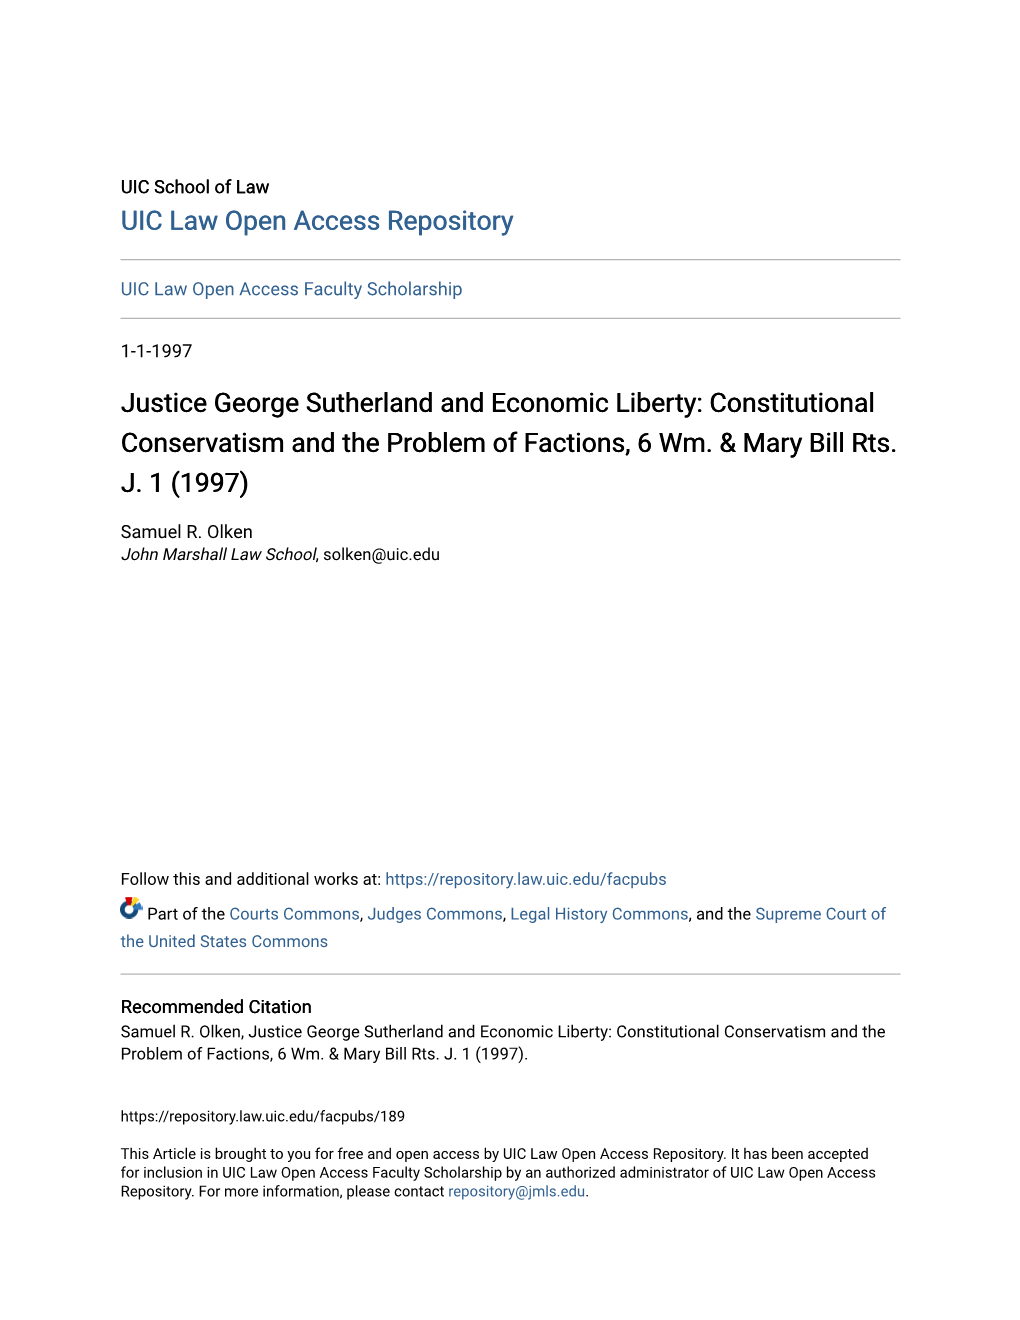 Justice George Sutherland and Economic Liberty: Constitutional Conservatism and the Problem of Factions, 6 Wm